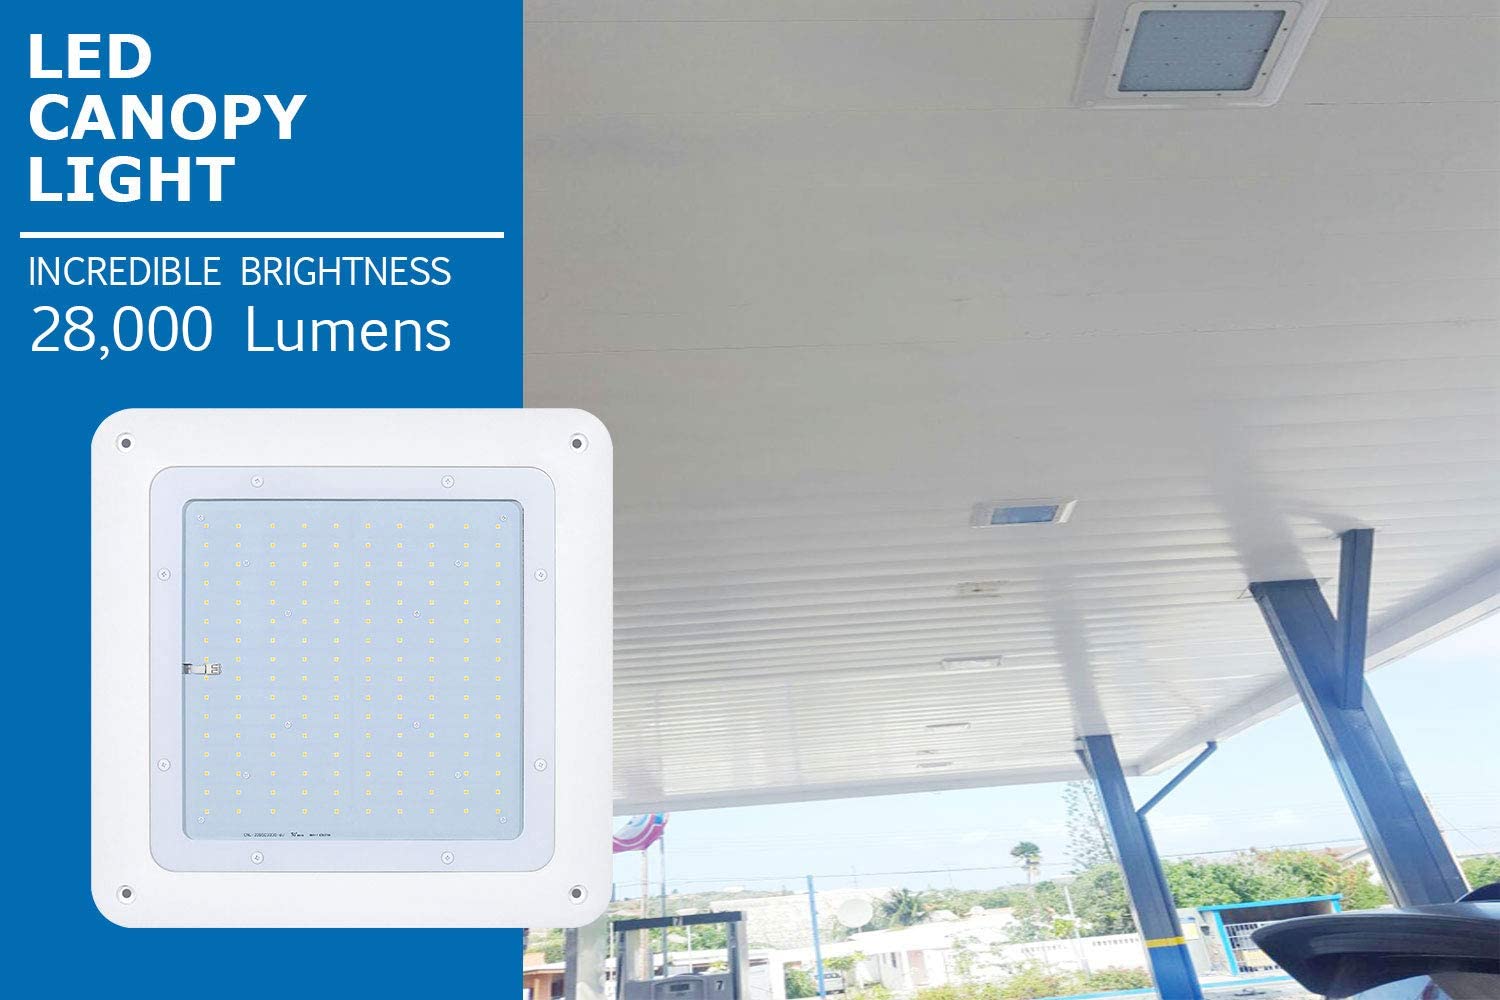 Hytronics 200W LED Canopy Light,28000 Lumens,600-850W HPS/HID Replacement,140 LM/W, 5700K Cool White - $105